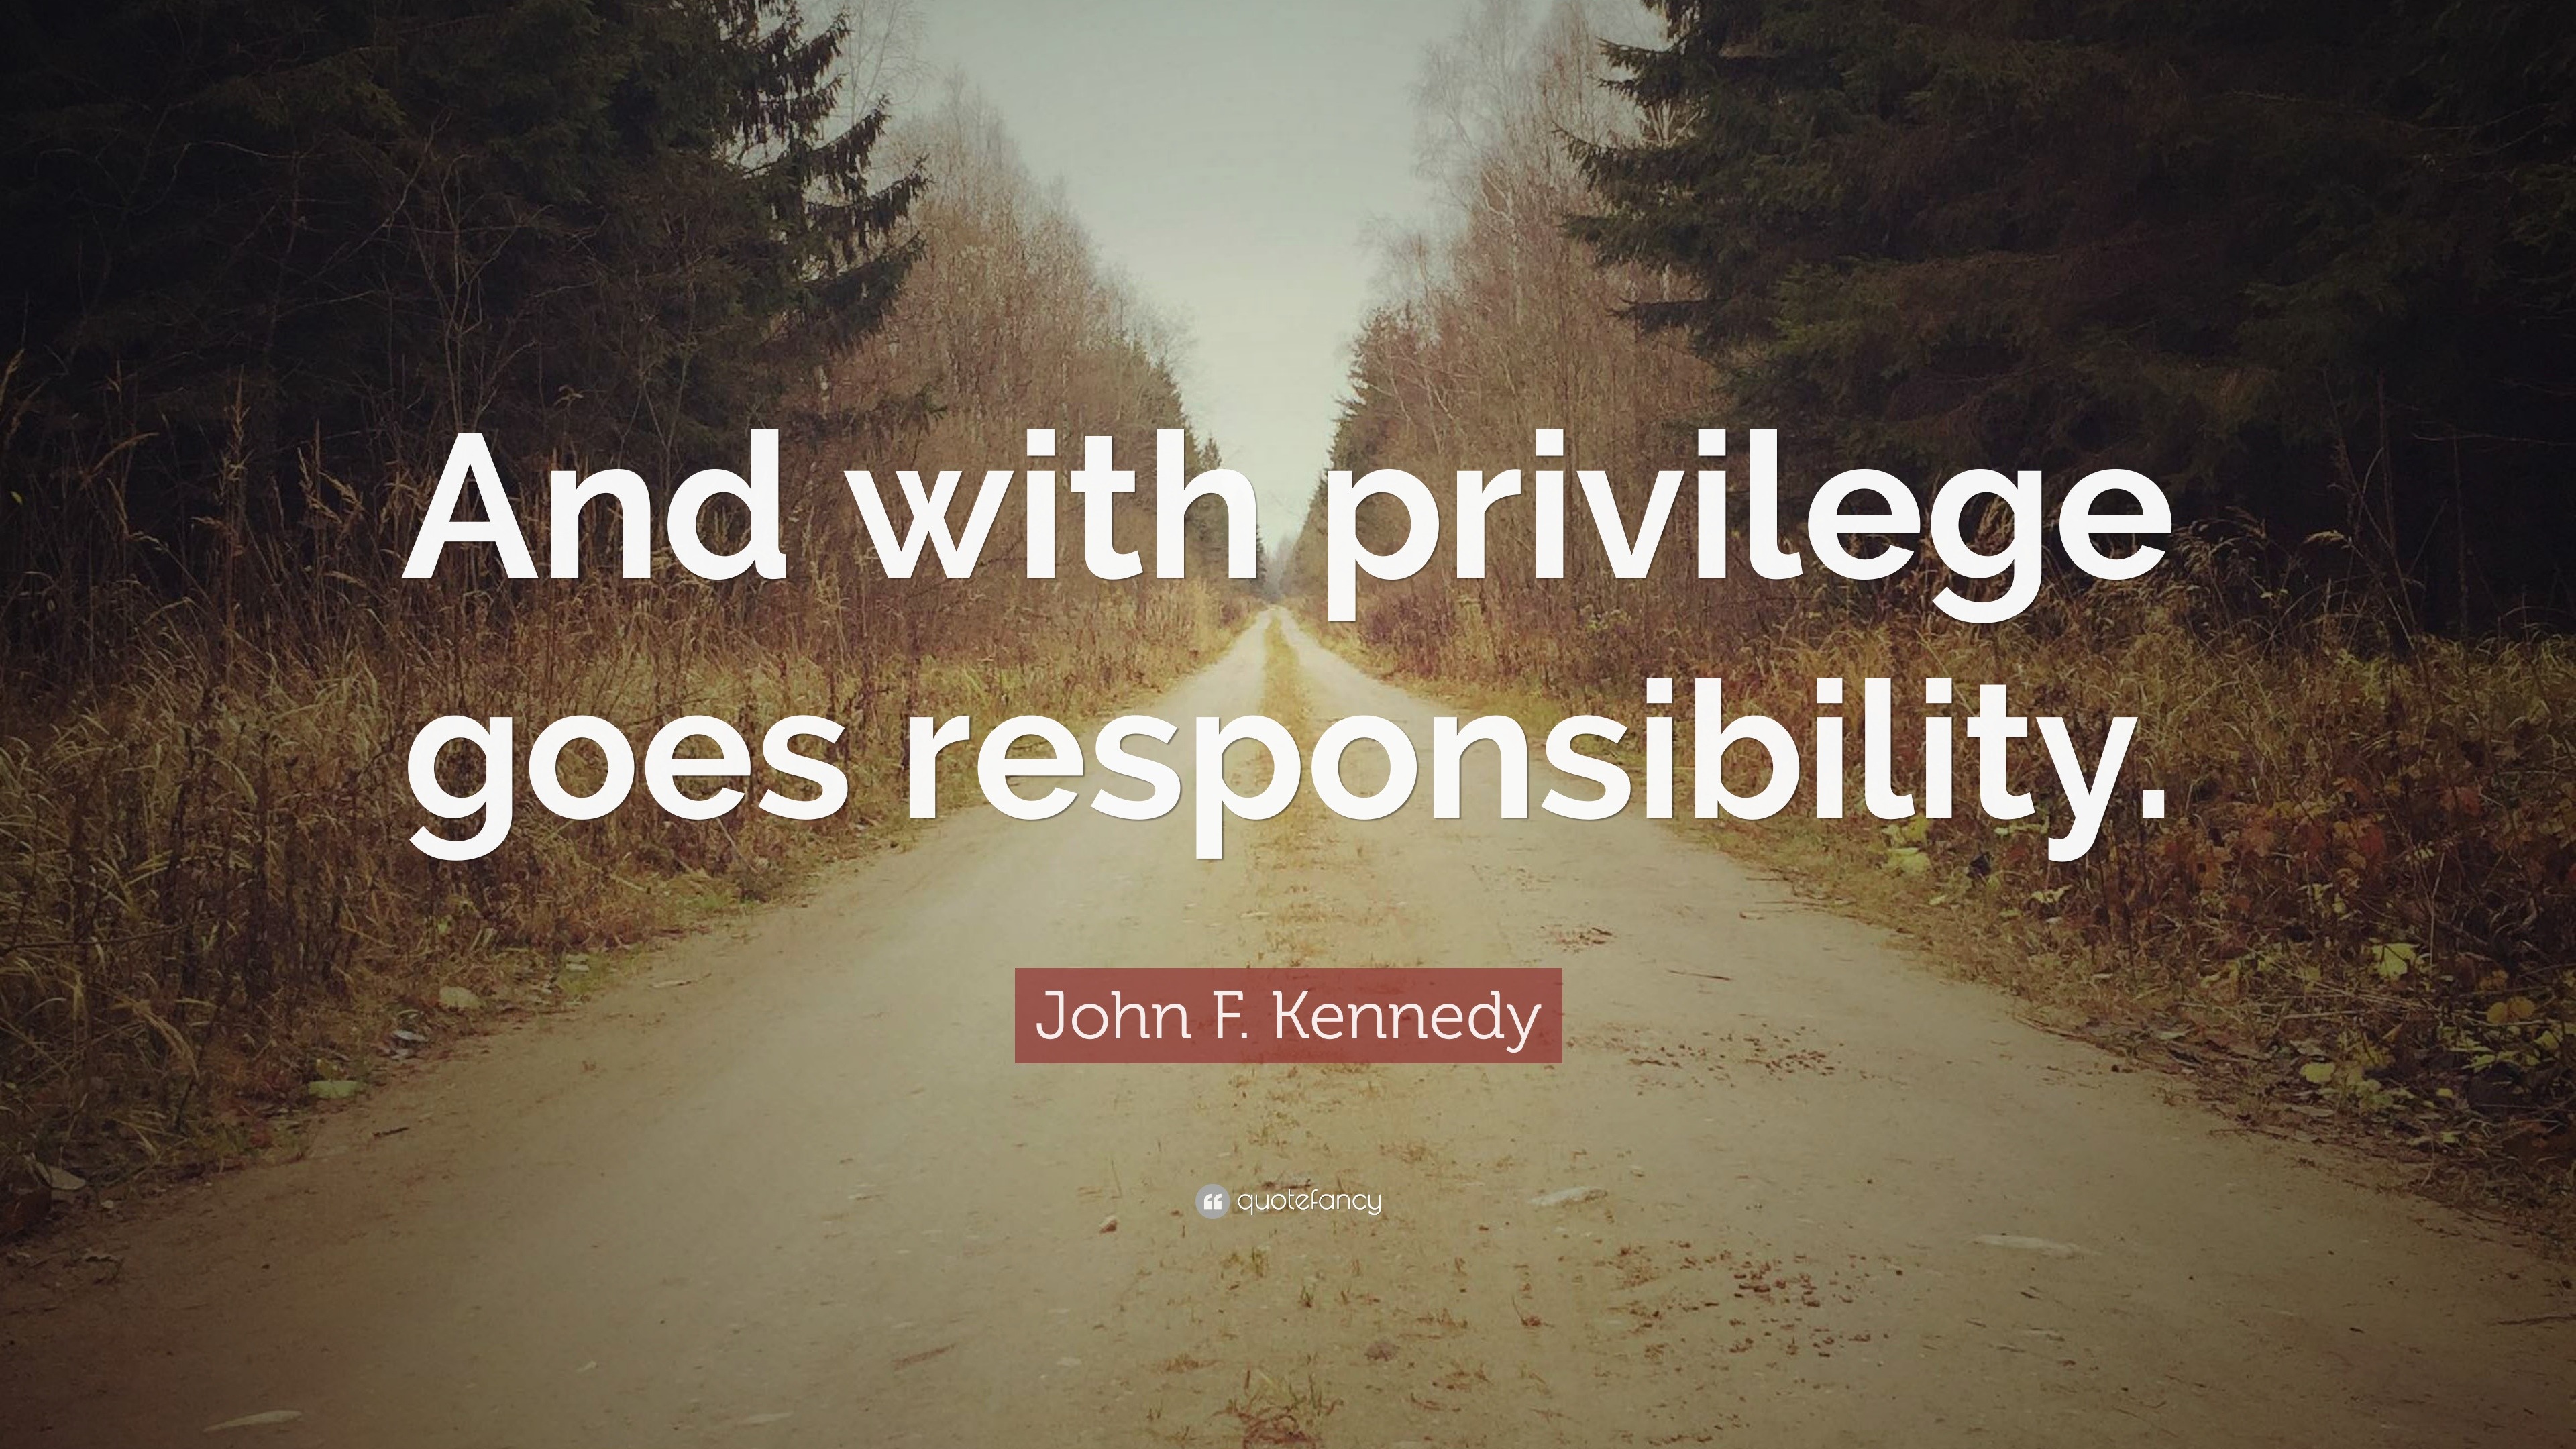 John F. Kennedy Quotes (100 wallpapers) - Quotefancy